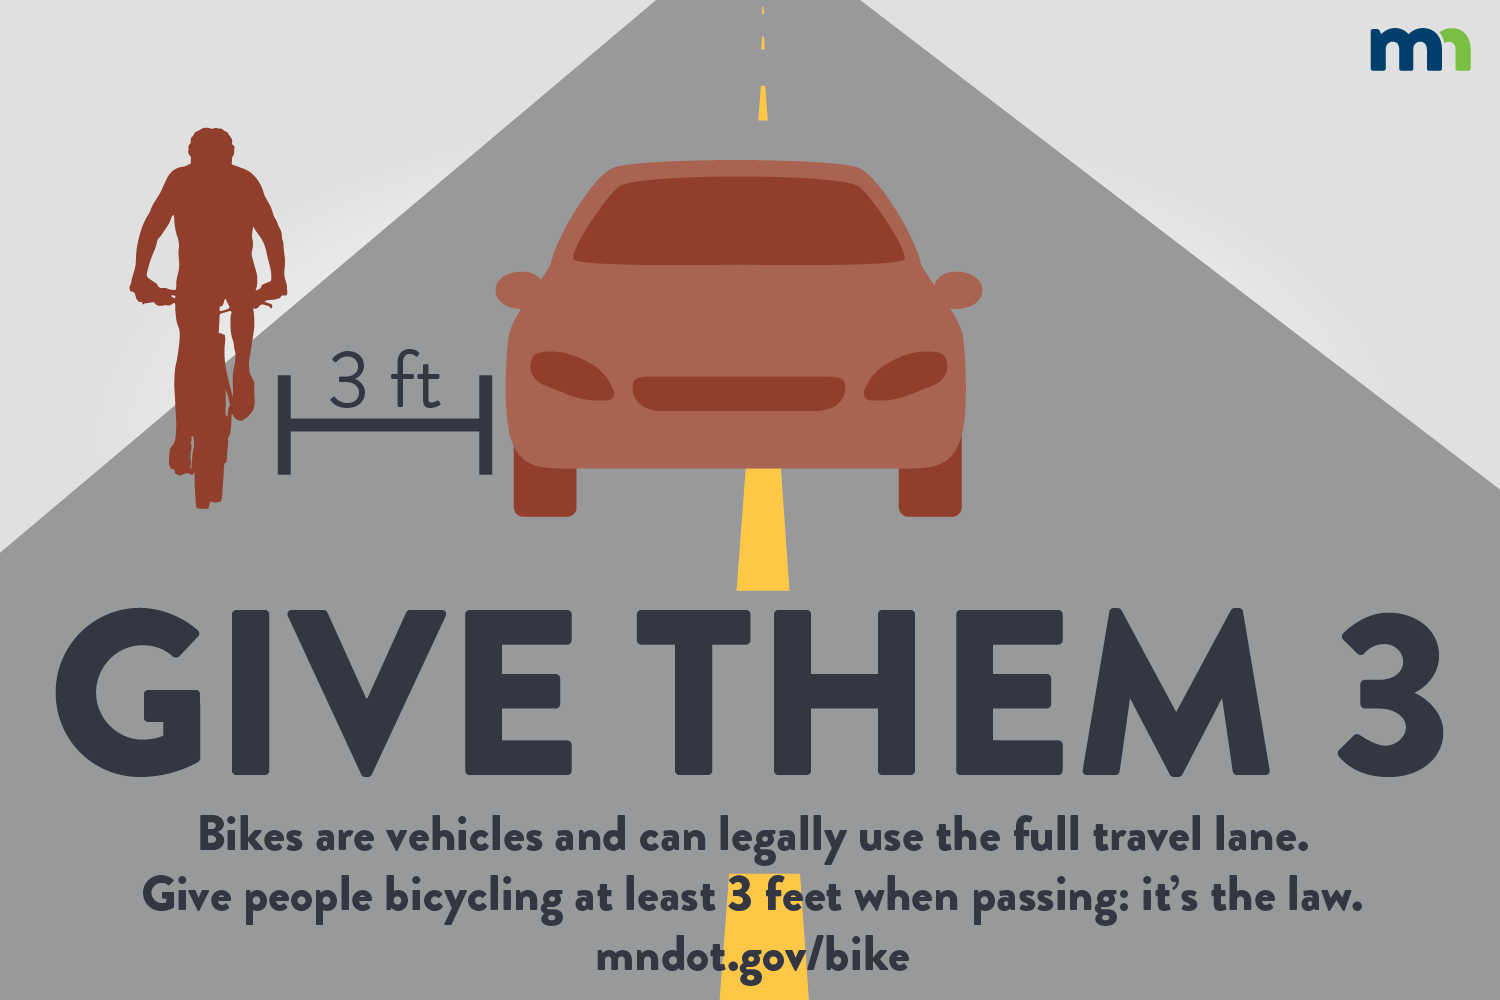 Give them 3: Bikes are vehicles and can legally use the full travel lane. People driving should give people bicycling at least three feet when passing. It is Minnesota law.